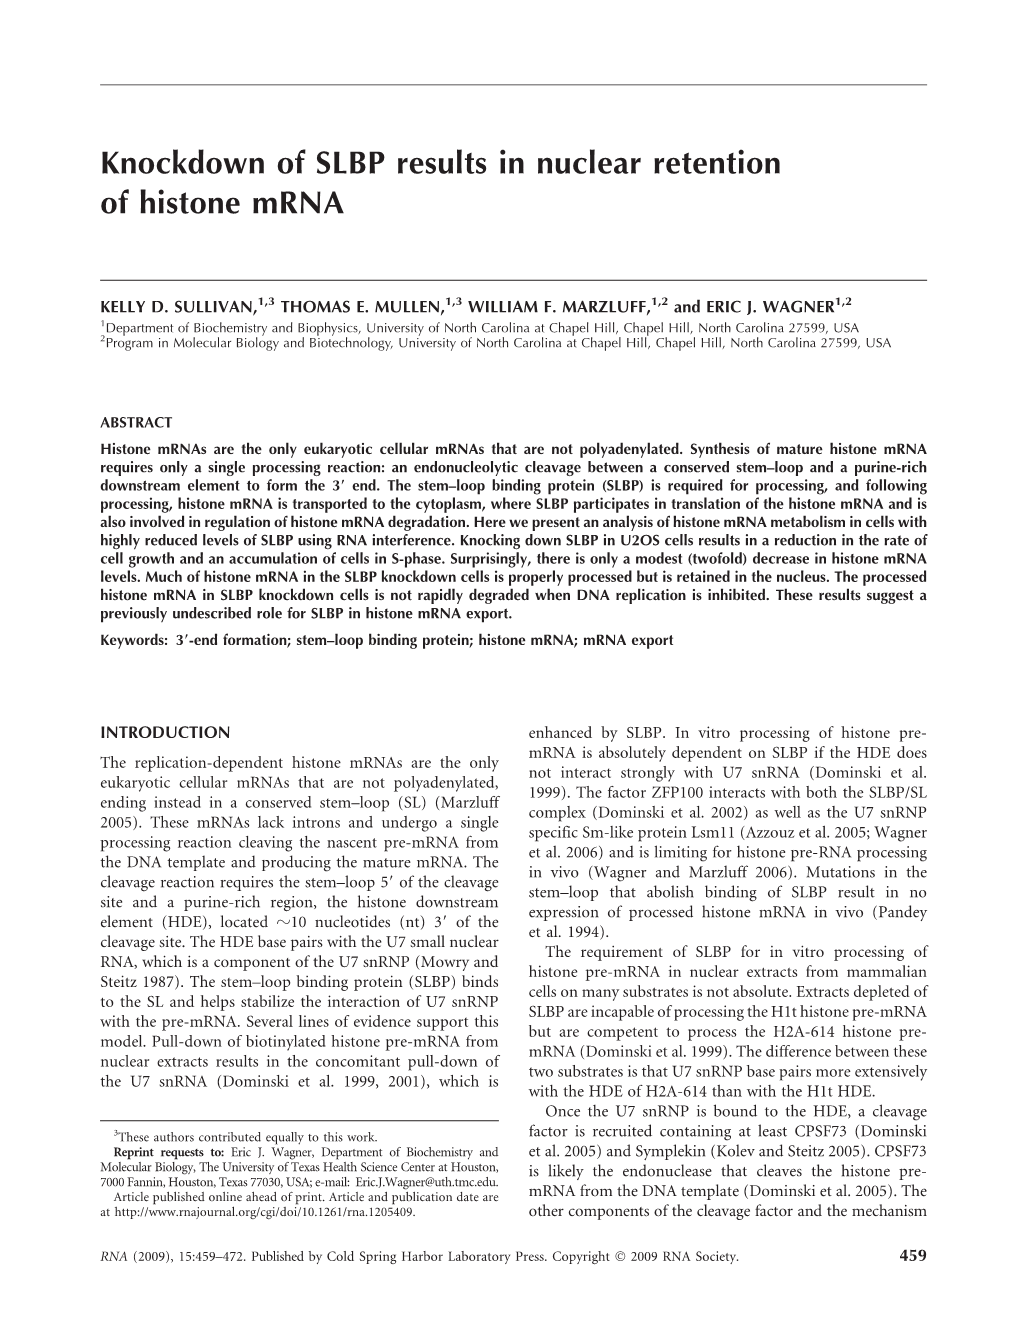 Knockdown of SLBP Results in Nuclear Retention of Histone Mrna